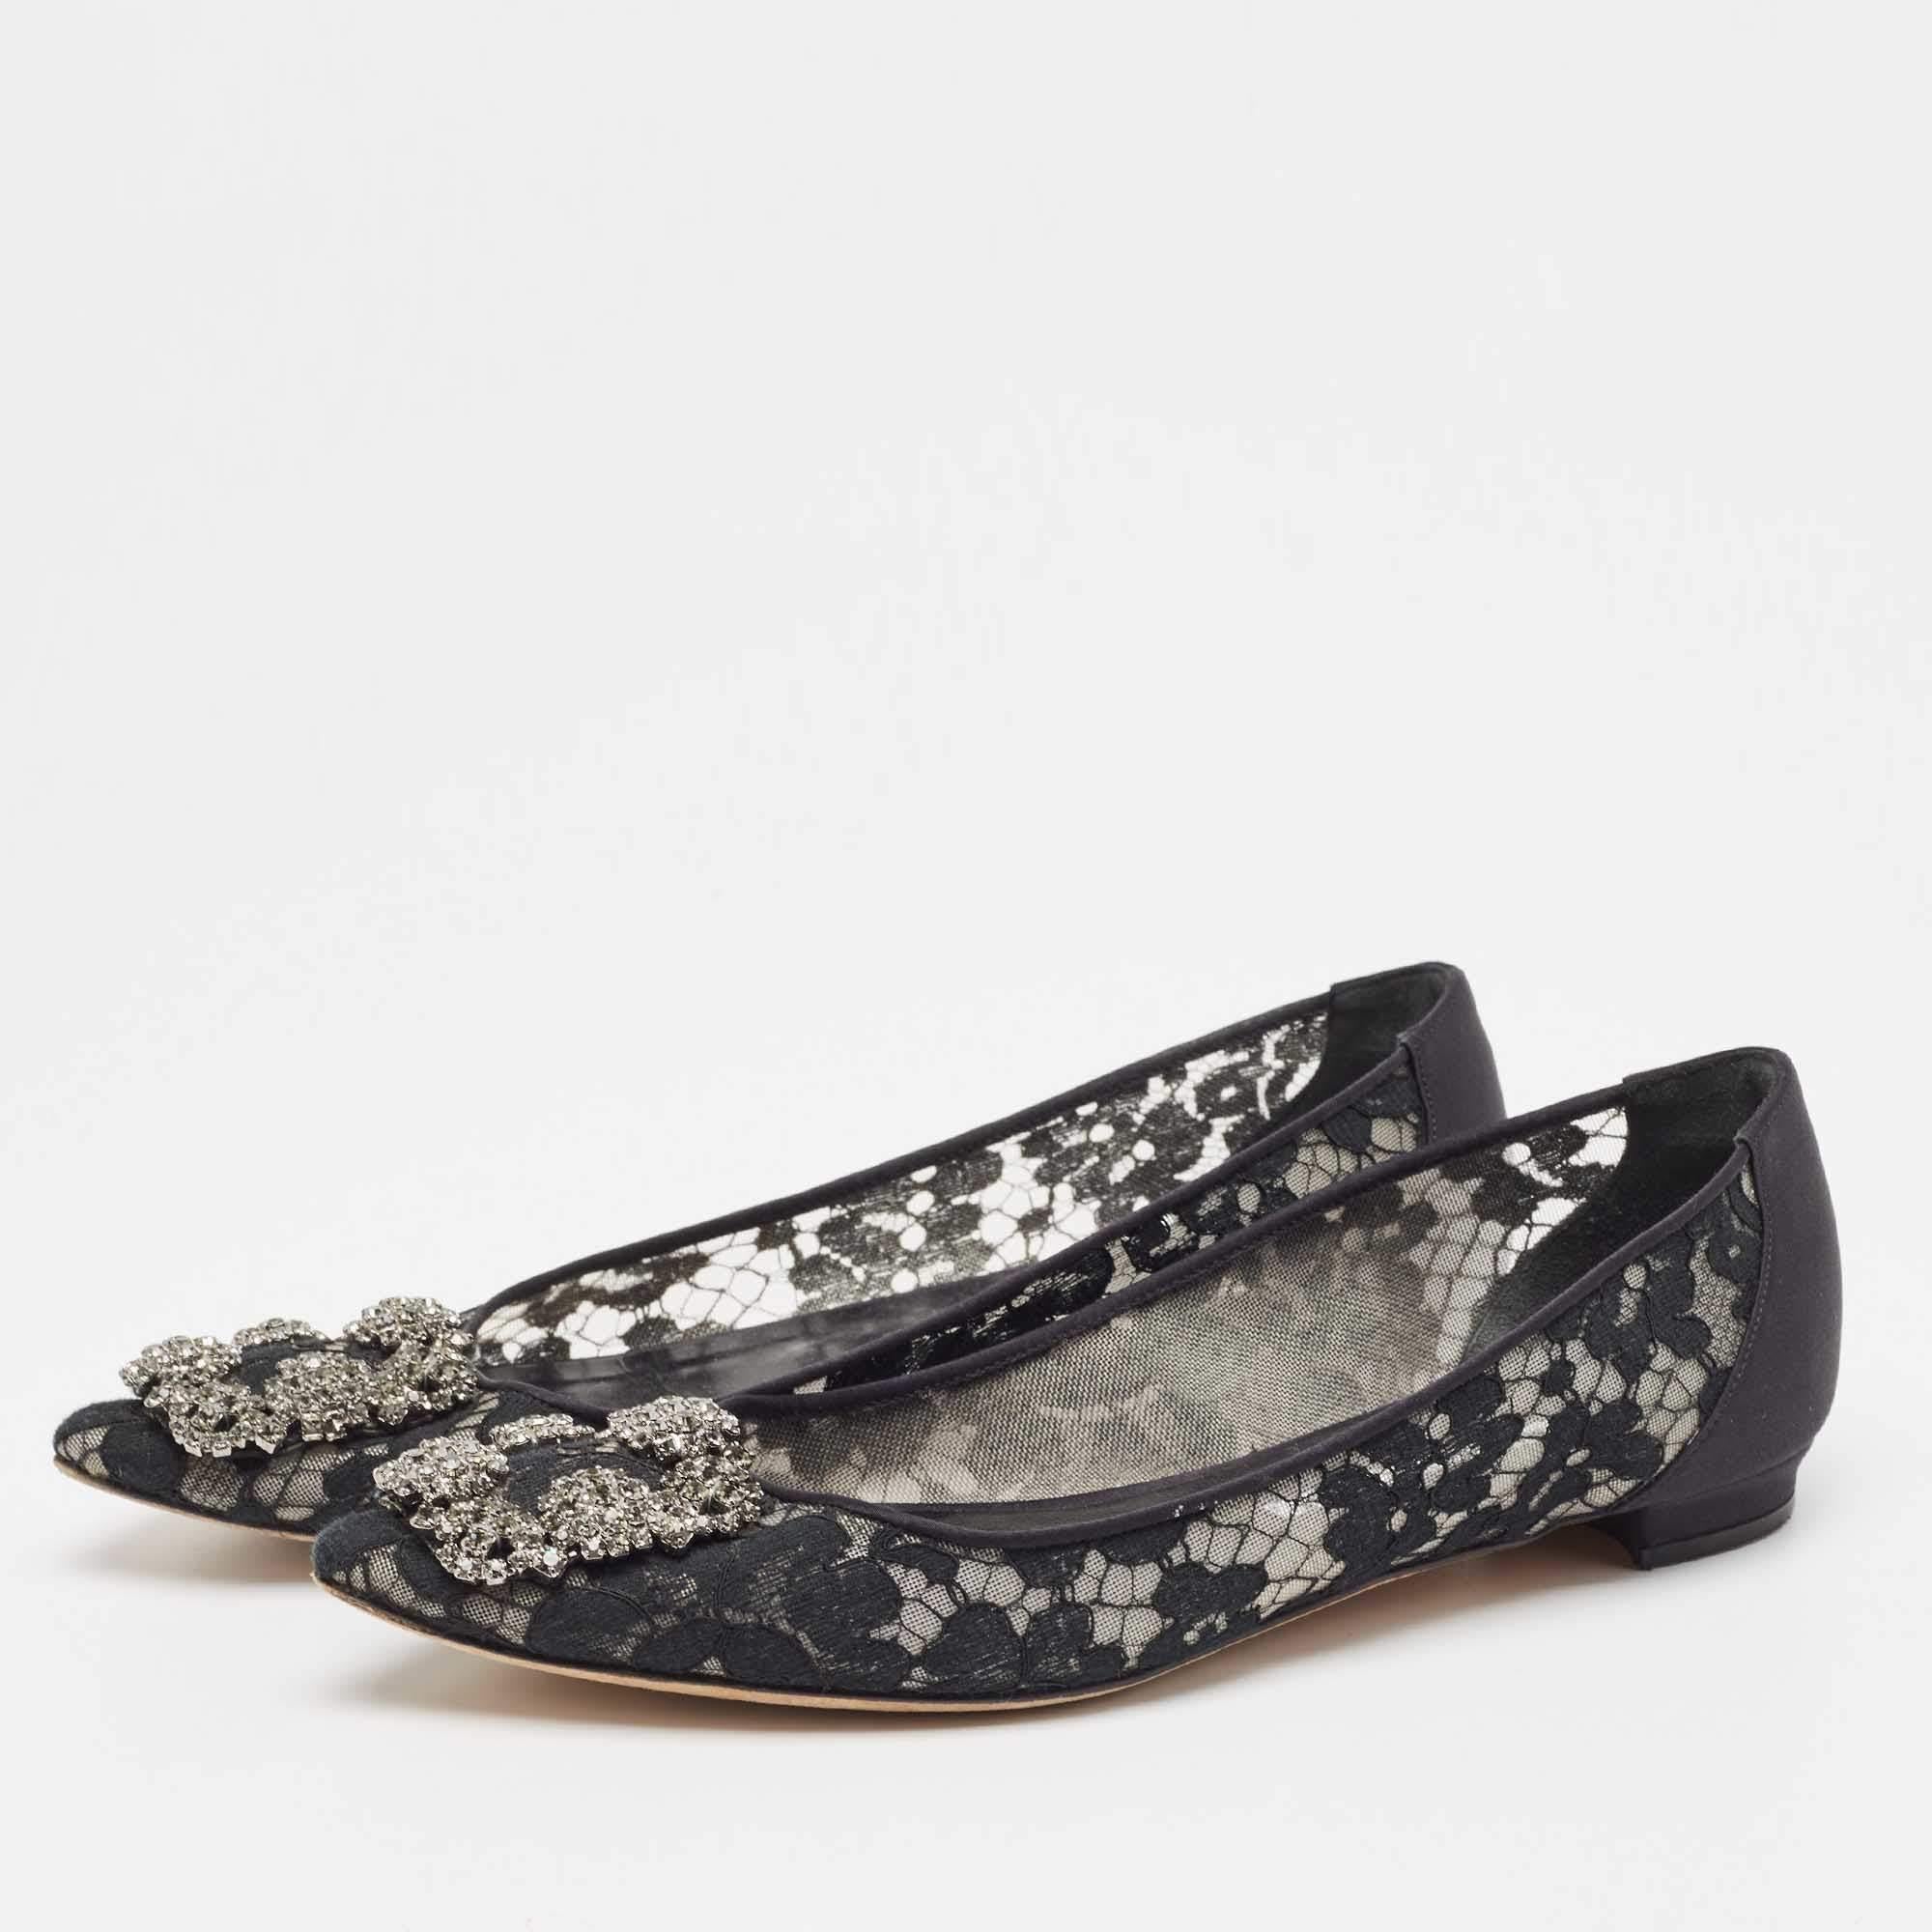 Created by Manolo Blahnik, these ballet flats are a staple style every shoe collection needs. Constructed using lace, the shoes are highlighted by the signature buckle on the uppers.

Includes: Original Dustbag